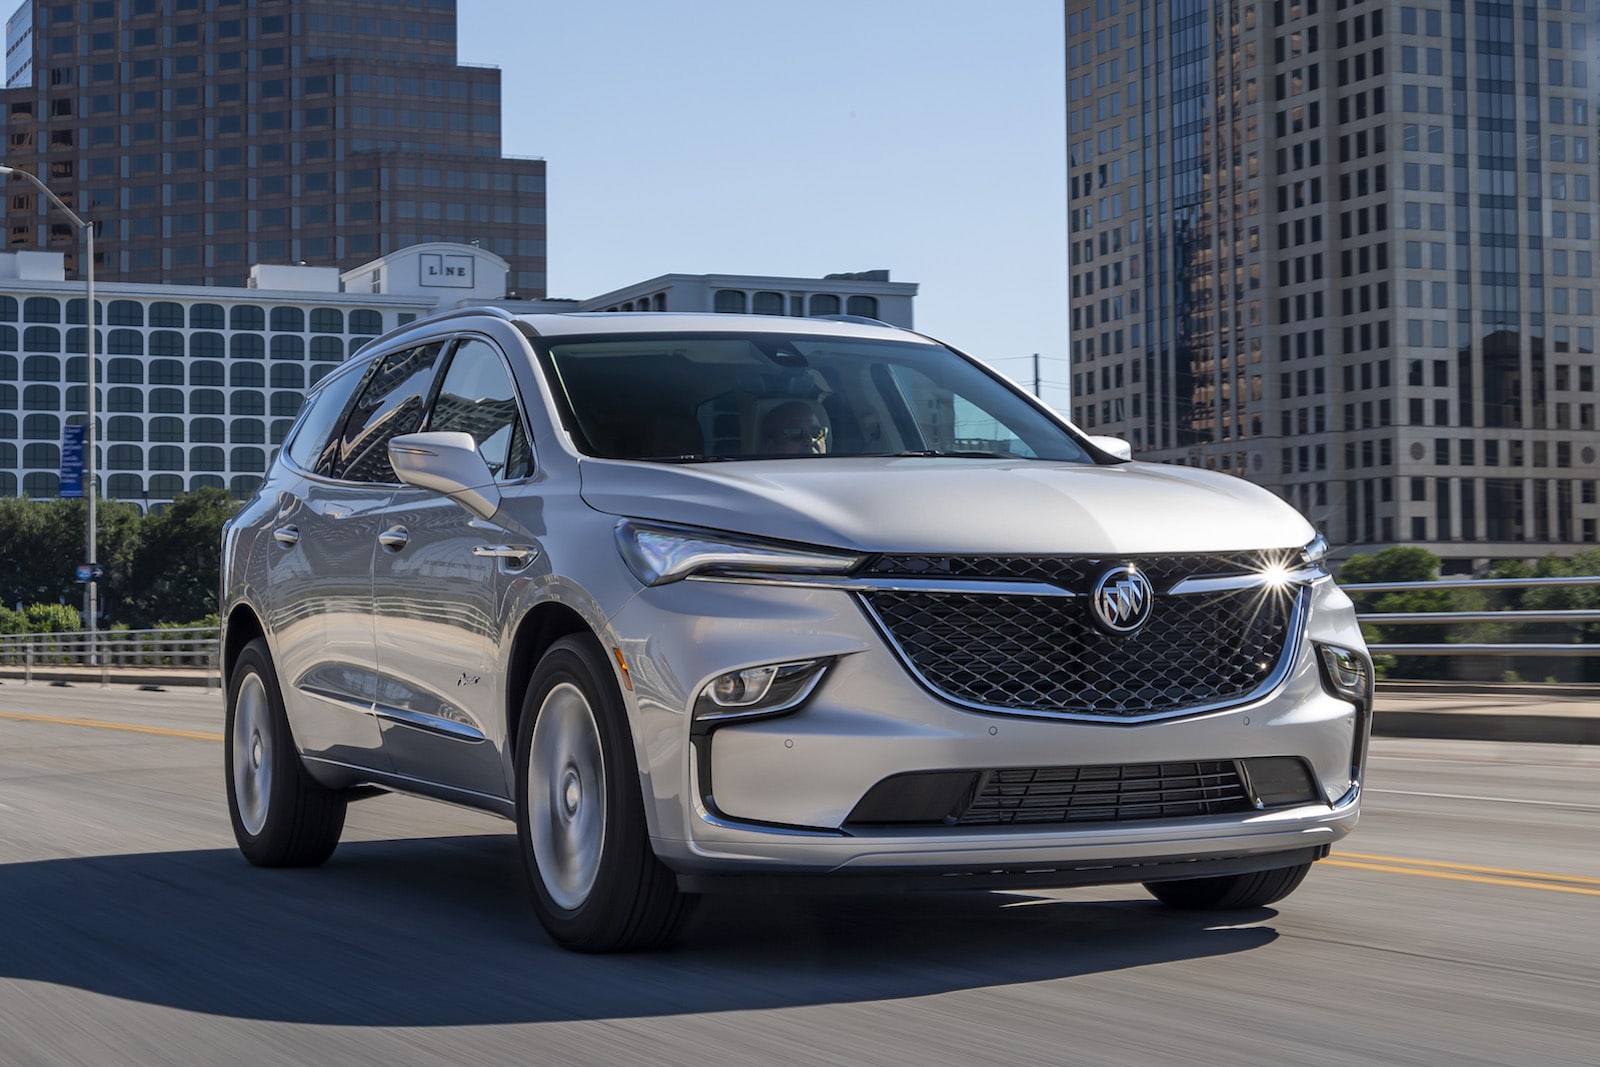 Buick Enclave Gets an Update for 2022 Model Year - The Detroit Bureau